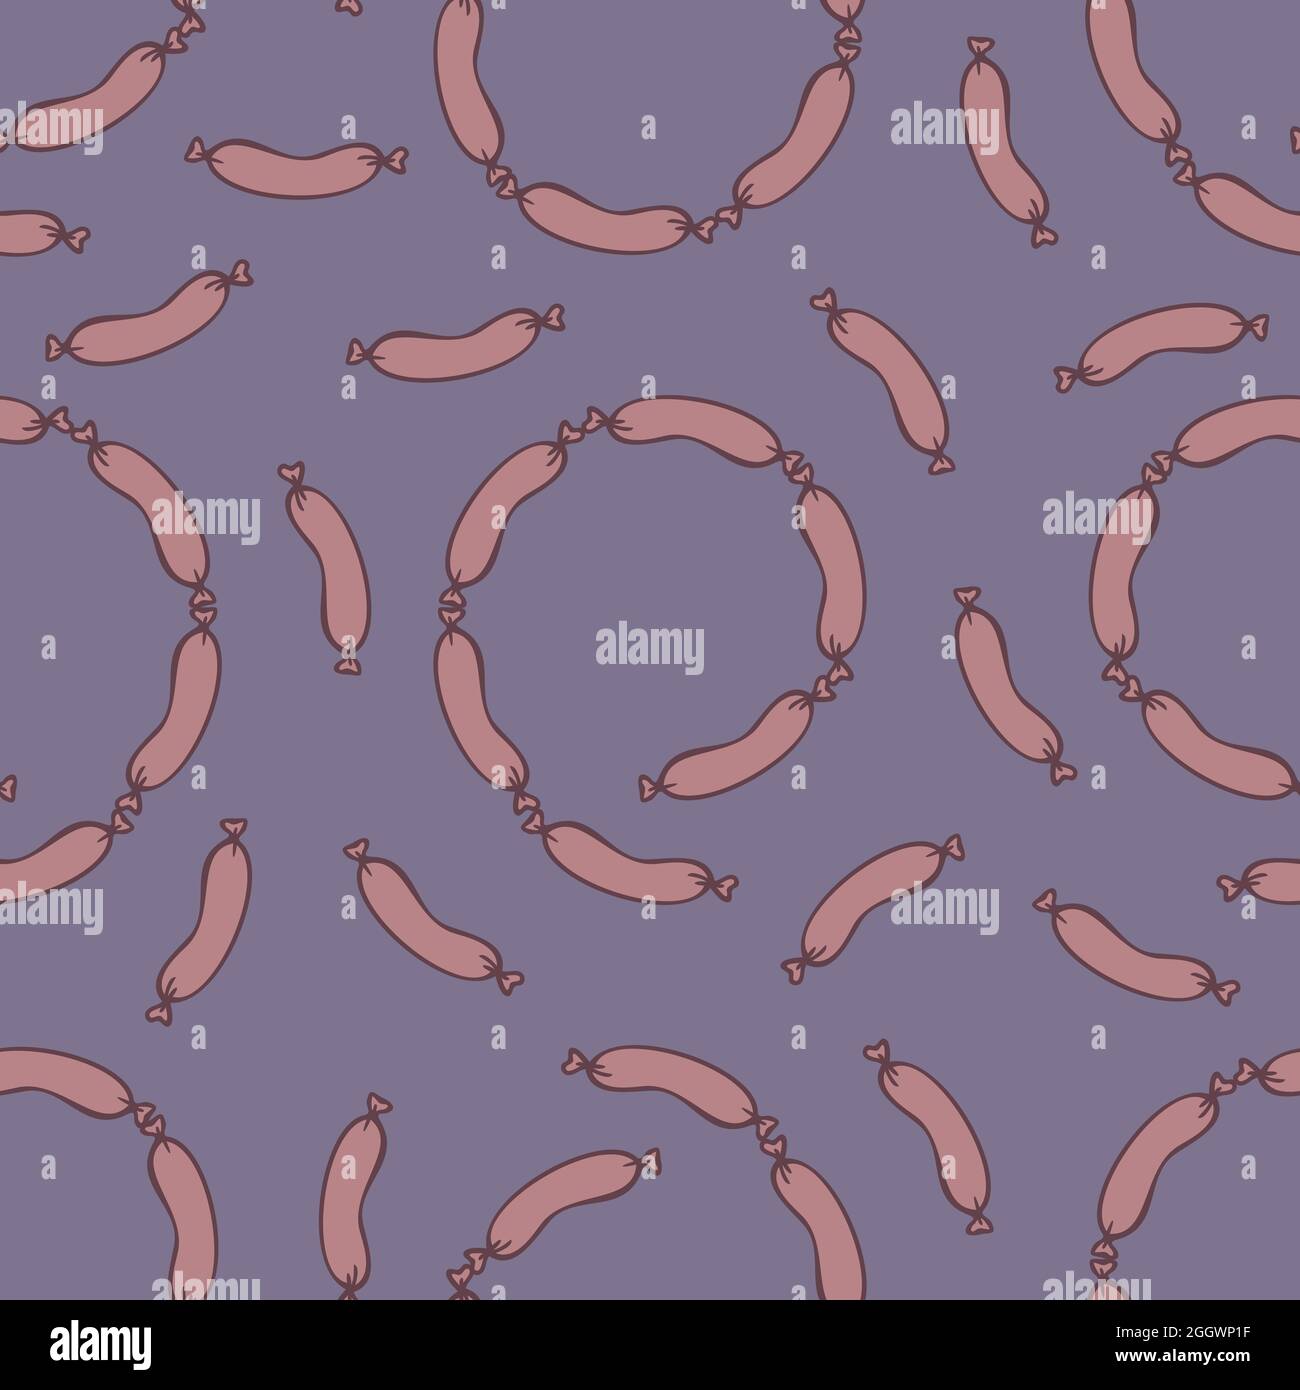 Vector seamless pattern with sausages. Fancy design with sausages. Stock Vector